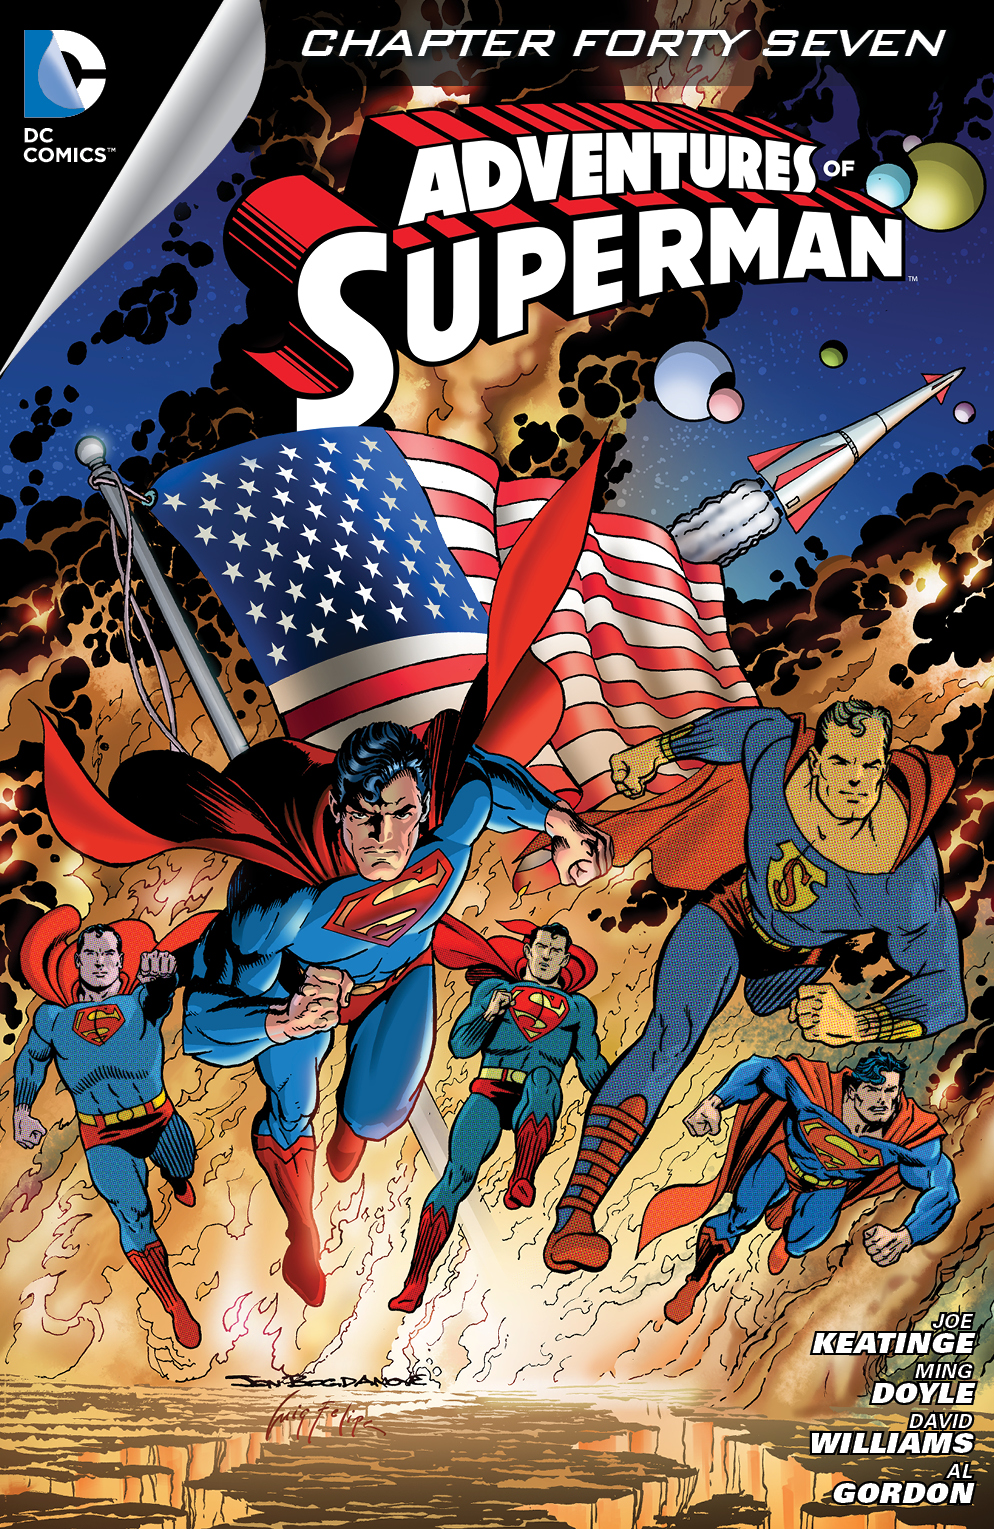 Adventures of Superman (2013-) #47 preview images